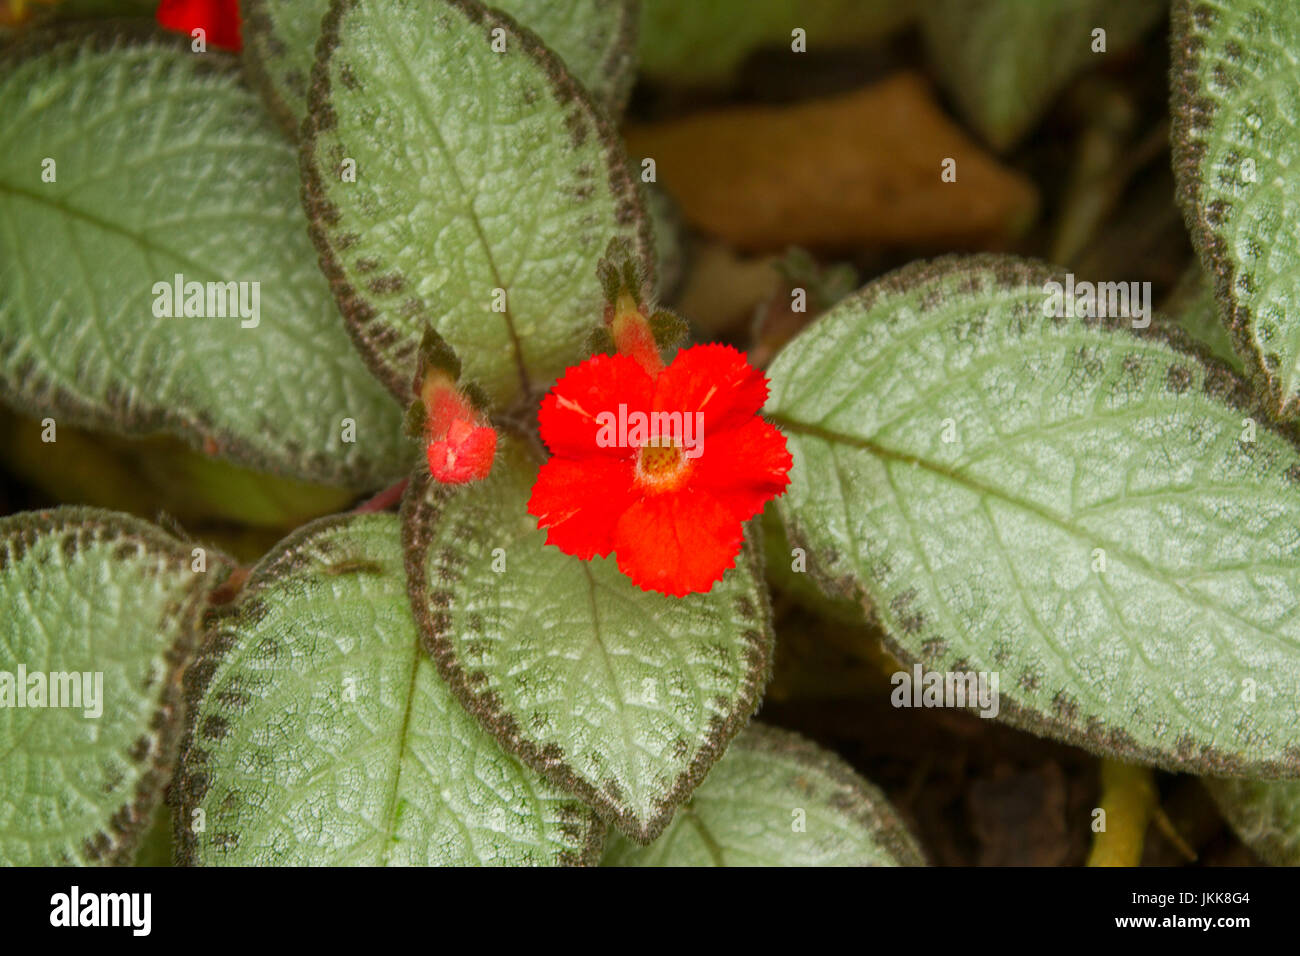 Vivid red flower of Episcia reptans, flame violet, among cluster of light green deeply veined leaves Stock Photo